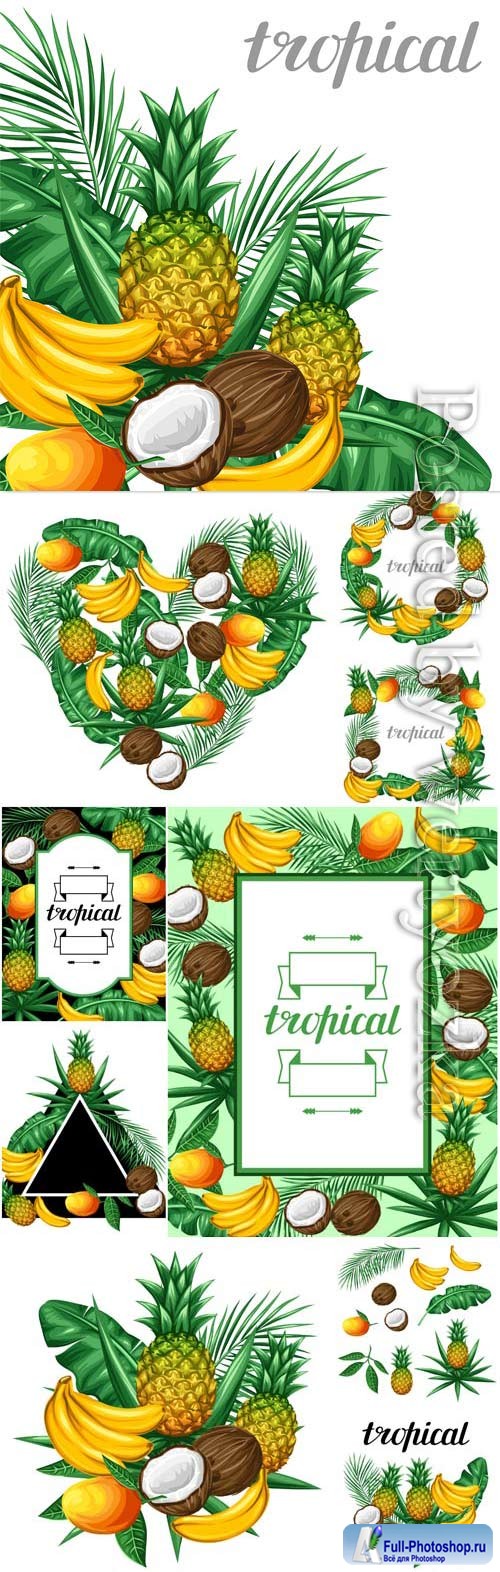 Tropical fruits in vector